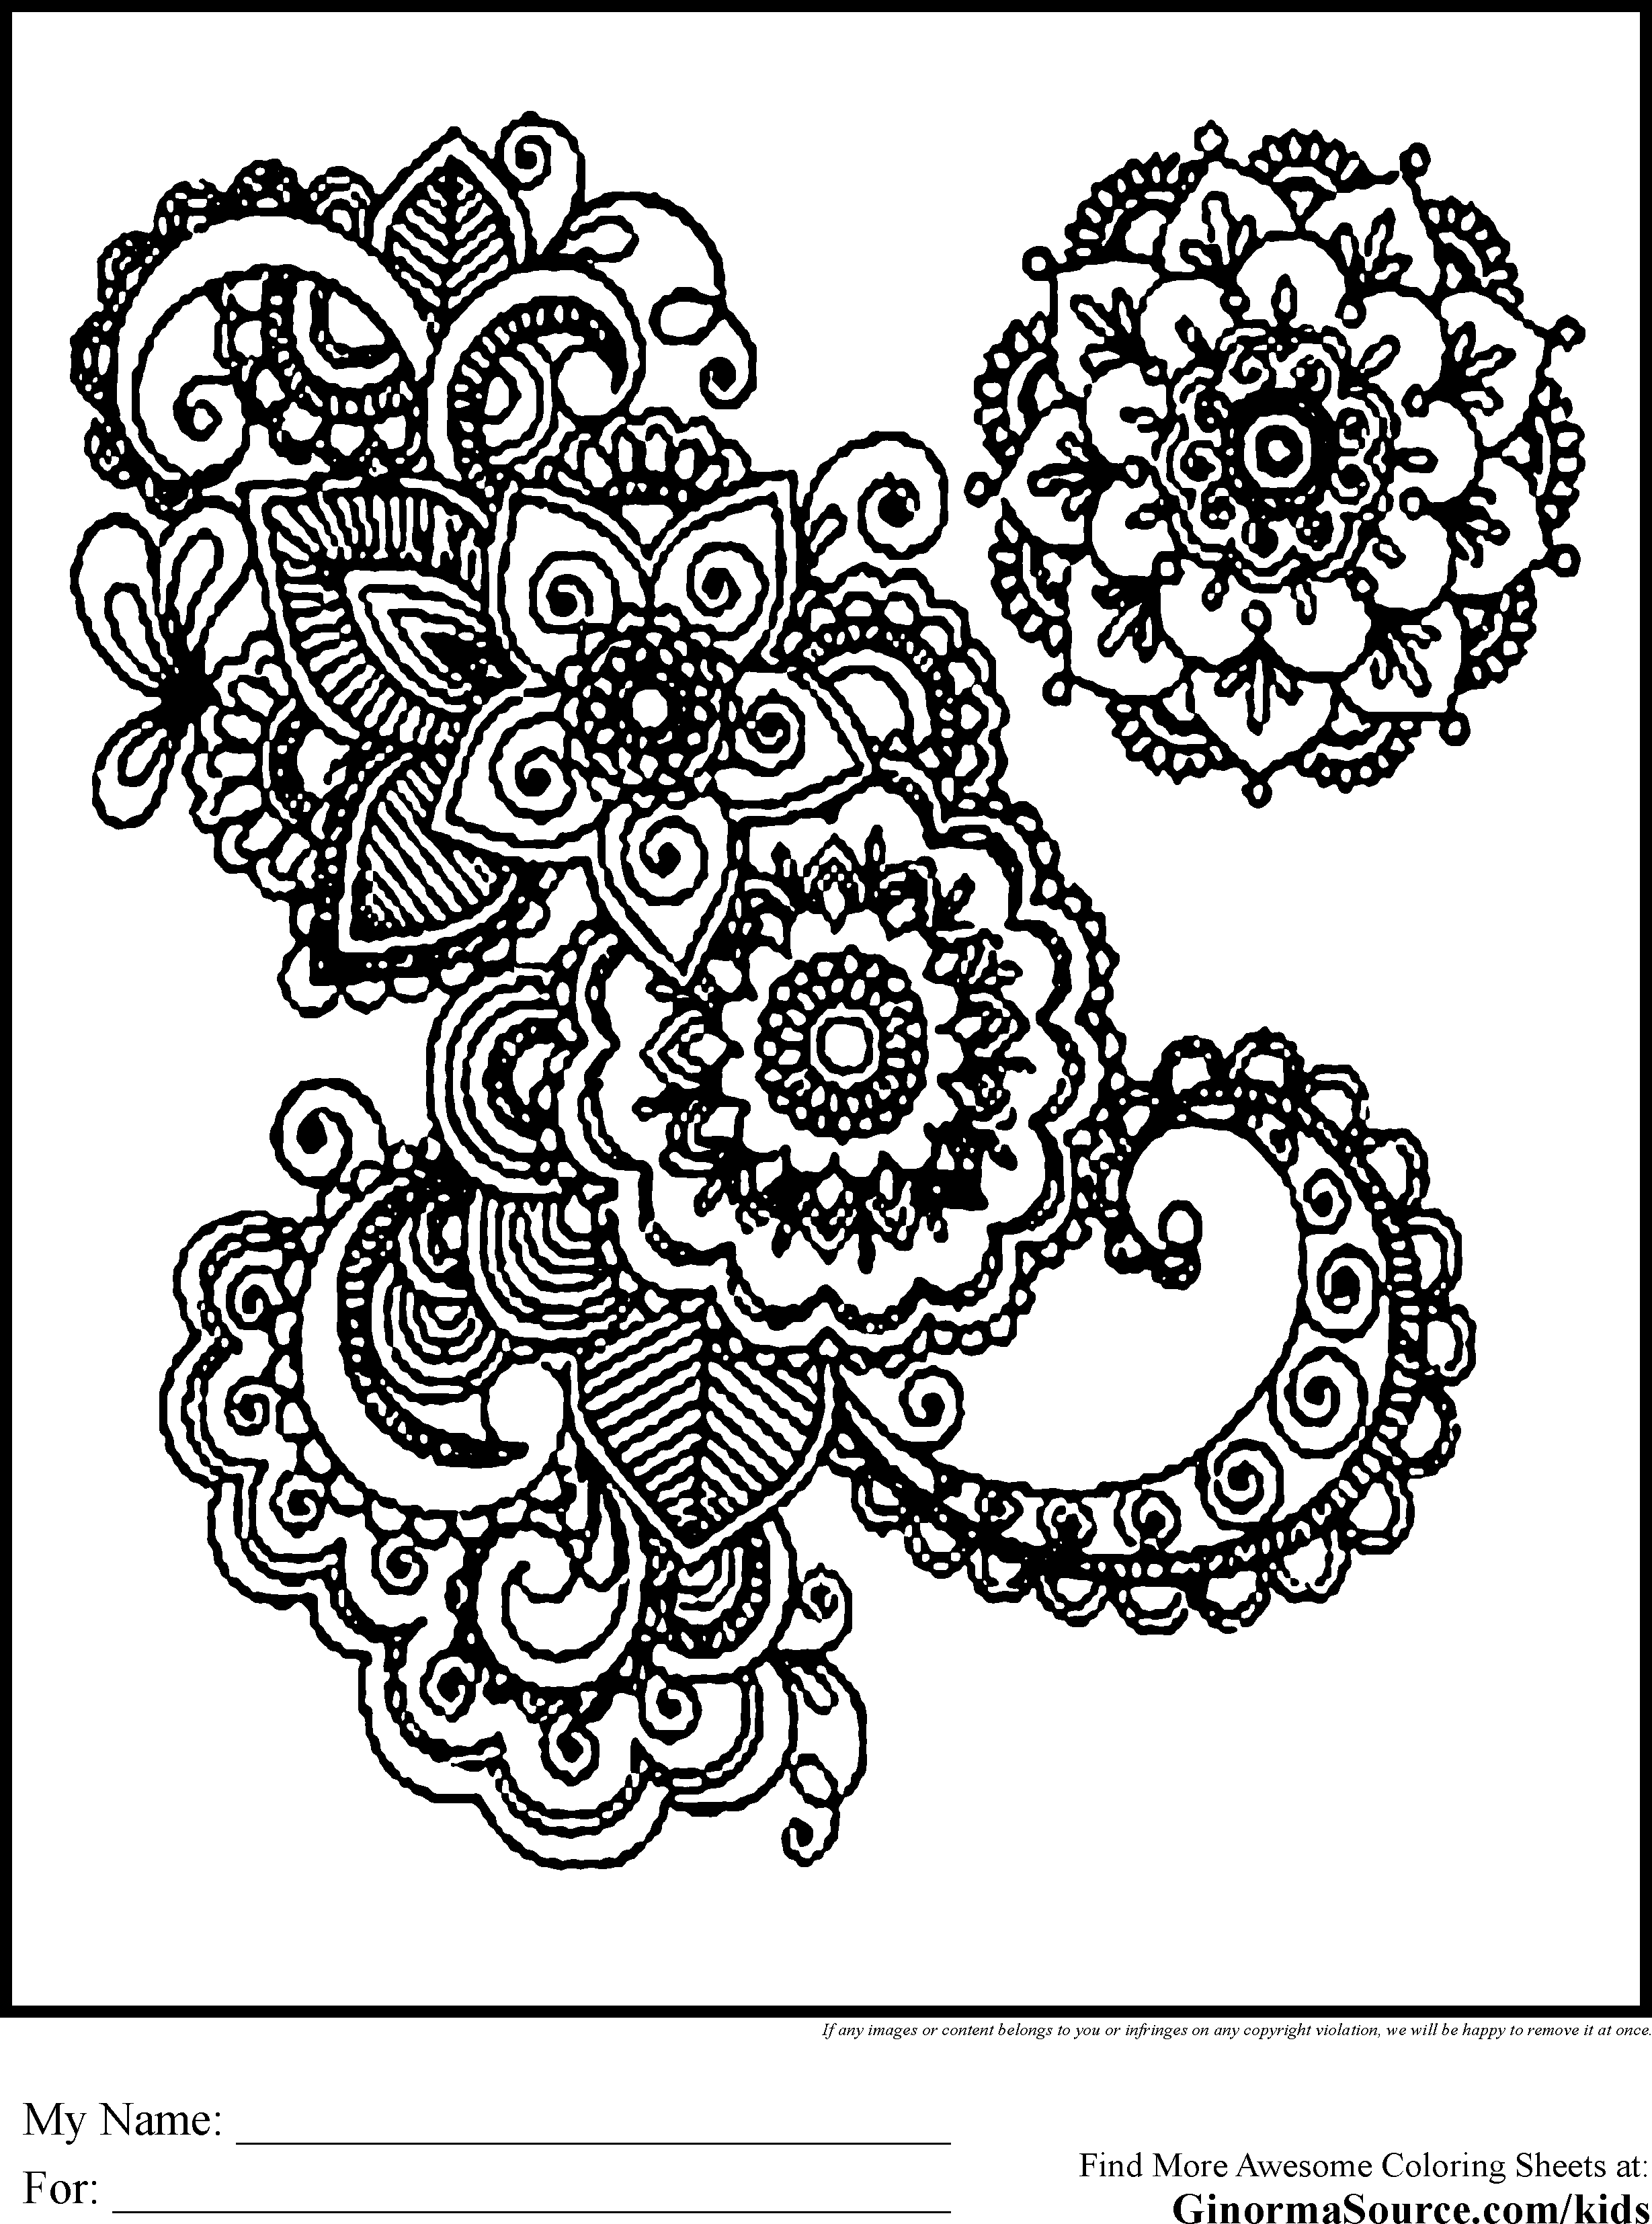 Advanced Coloring Pages - 4/4 - GINORMAsource Kids